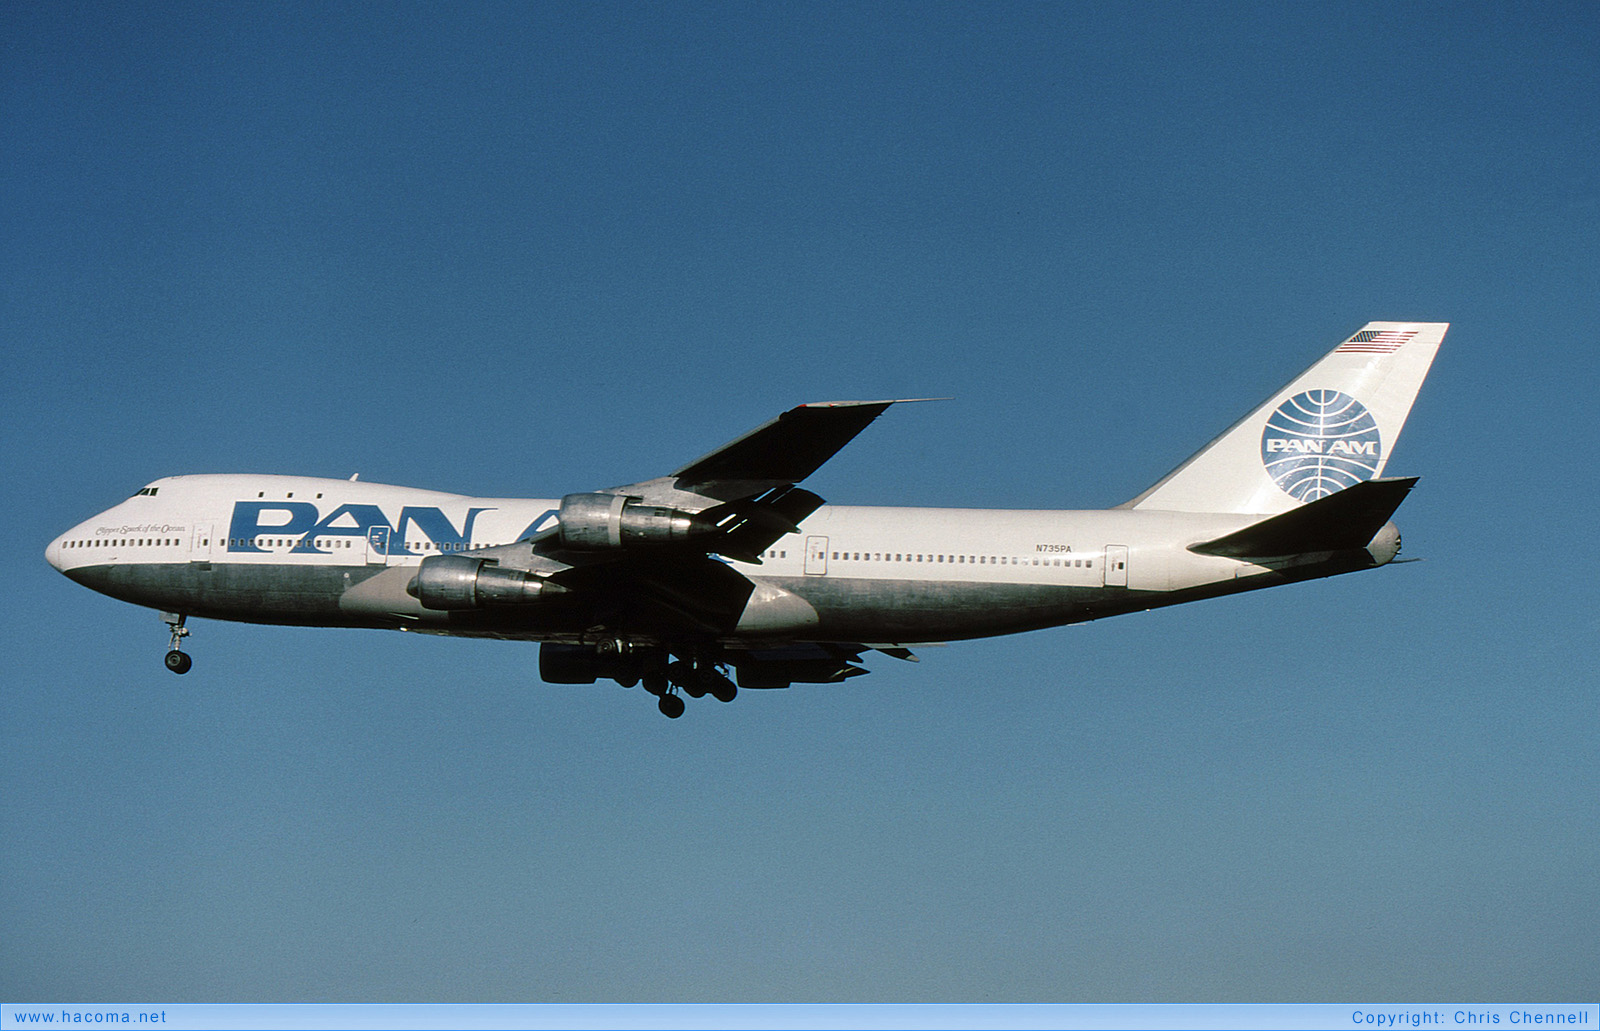 Photo of N735PA - Pan Am Clipper Constitution / Young America / Spark of the Ocean - London Heathrow Airport - Jan 12, 1991